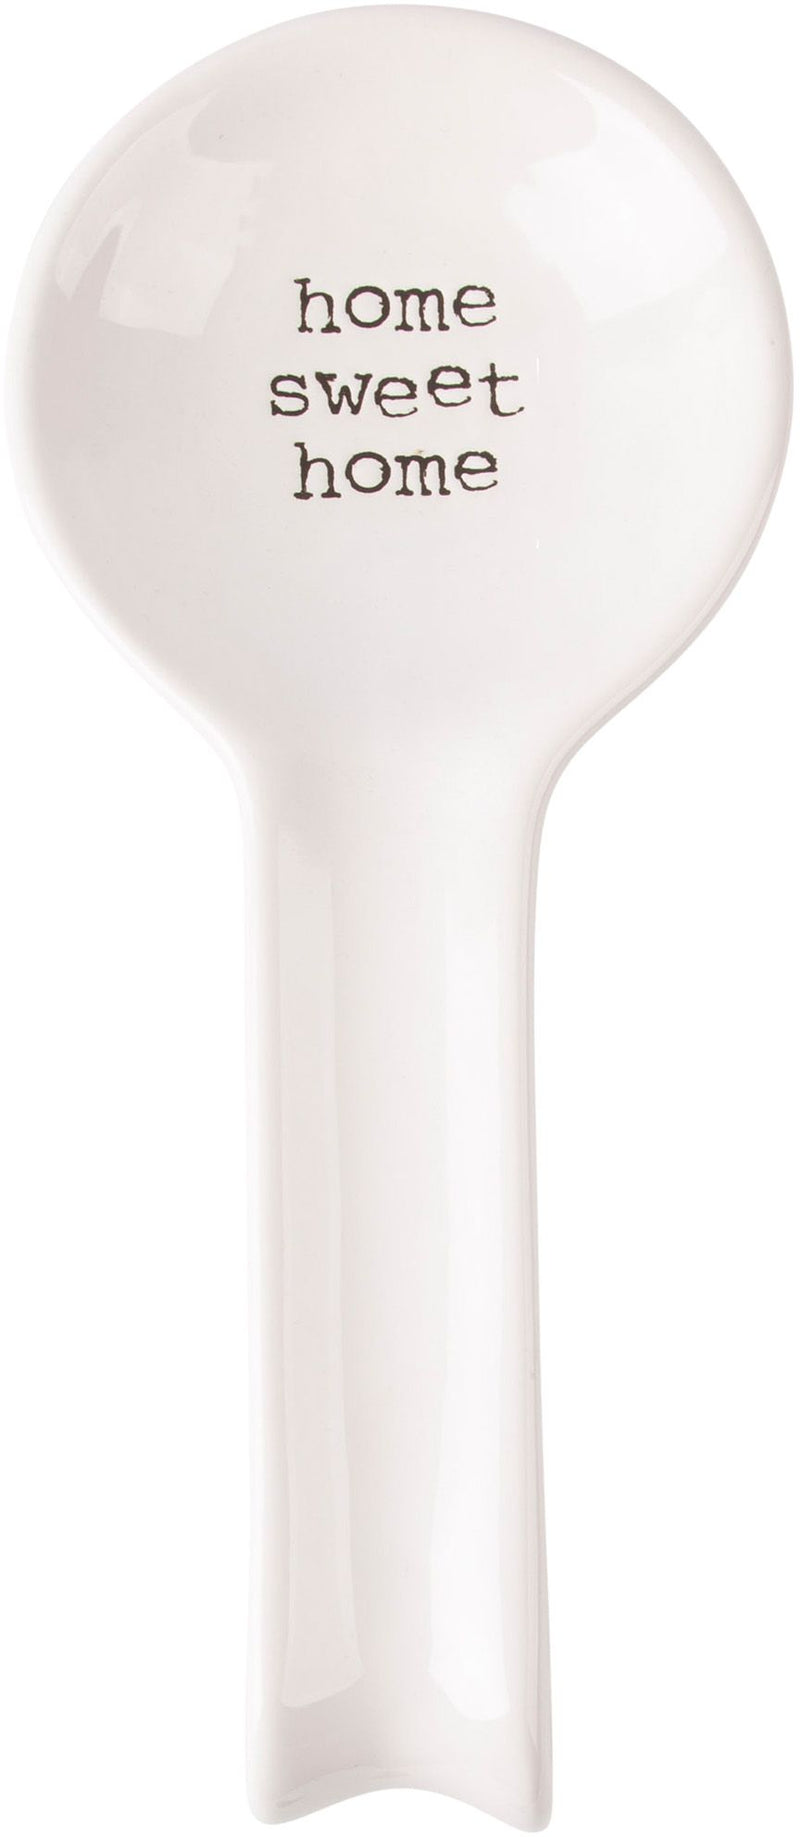 11.5"L ROUND HEAD SPOON REST WITH HOME SWEET HOME SENTIMENT